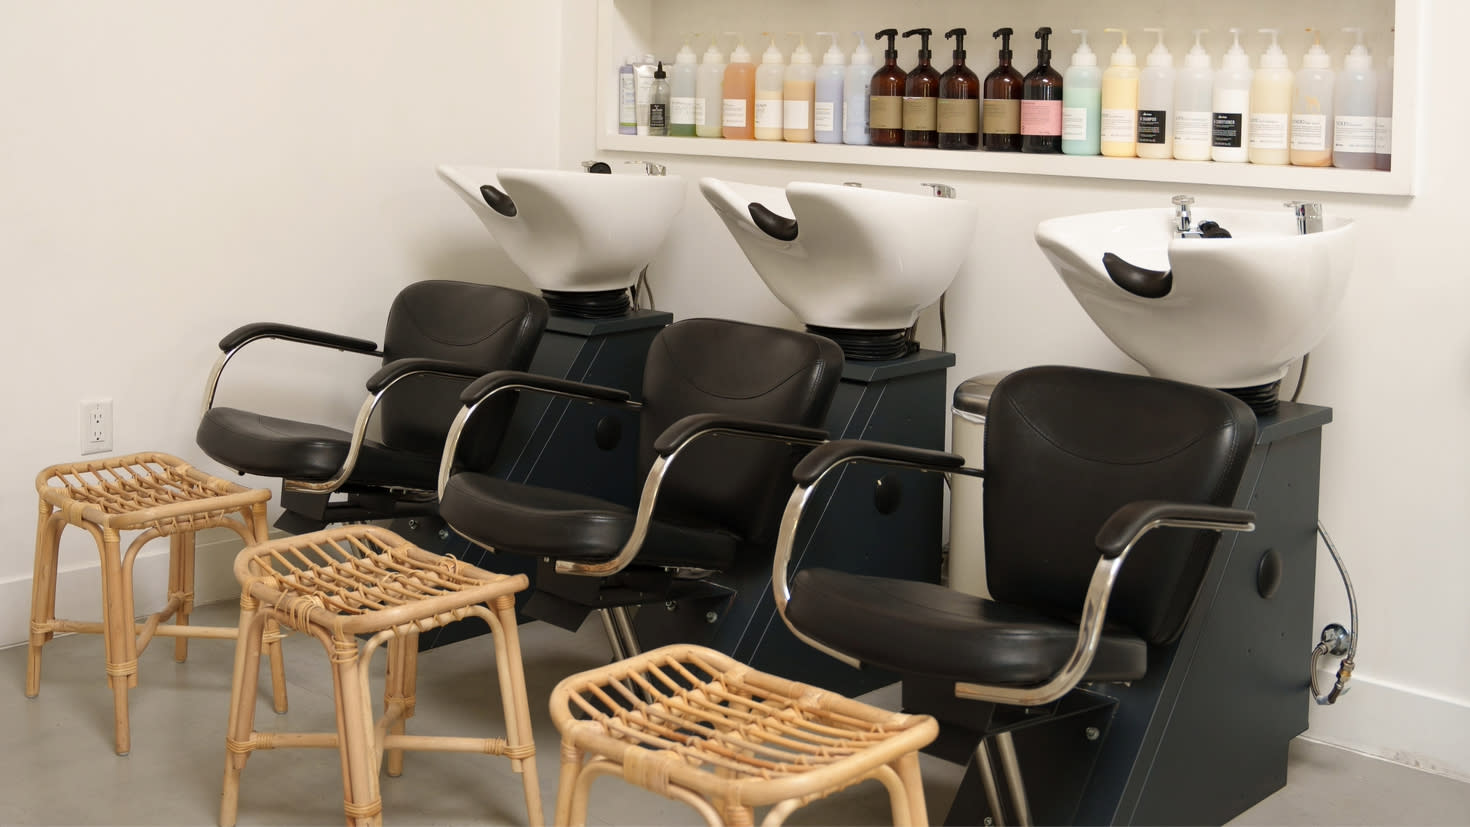 Salon hair washing station with 3 sinks, chairs, and stools in front of a wall with a shelf of hair products. 